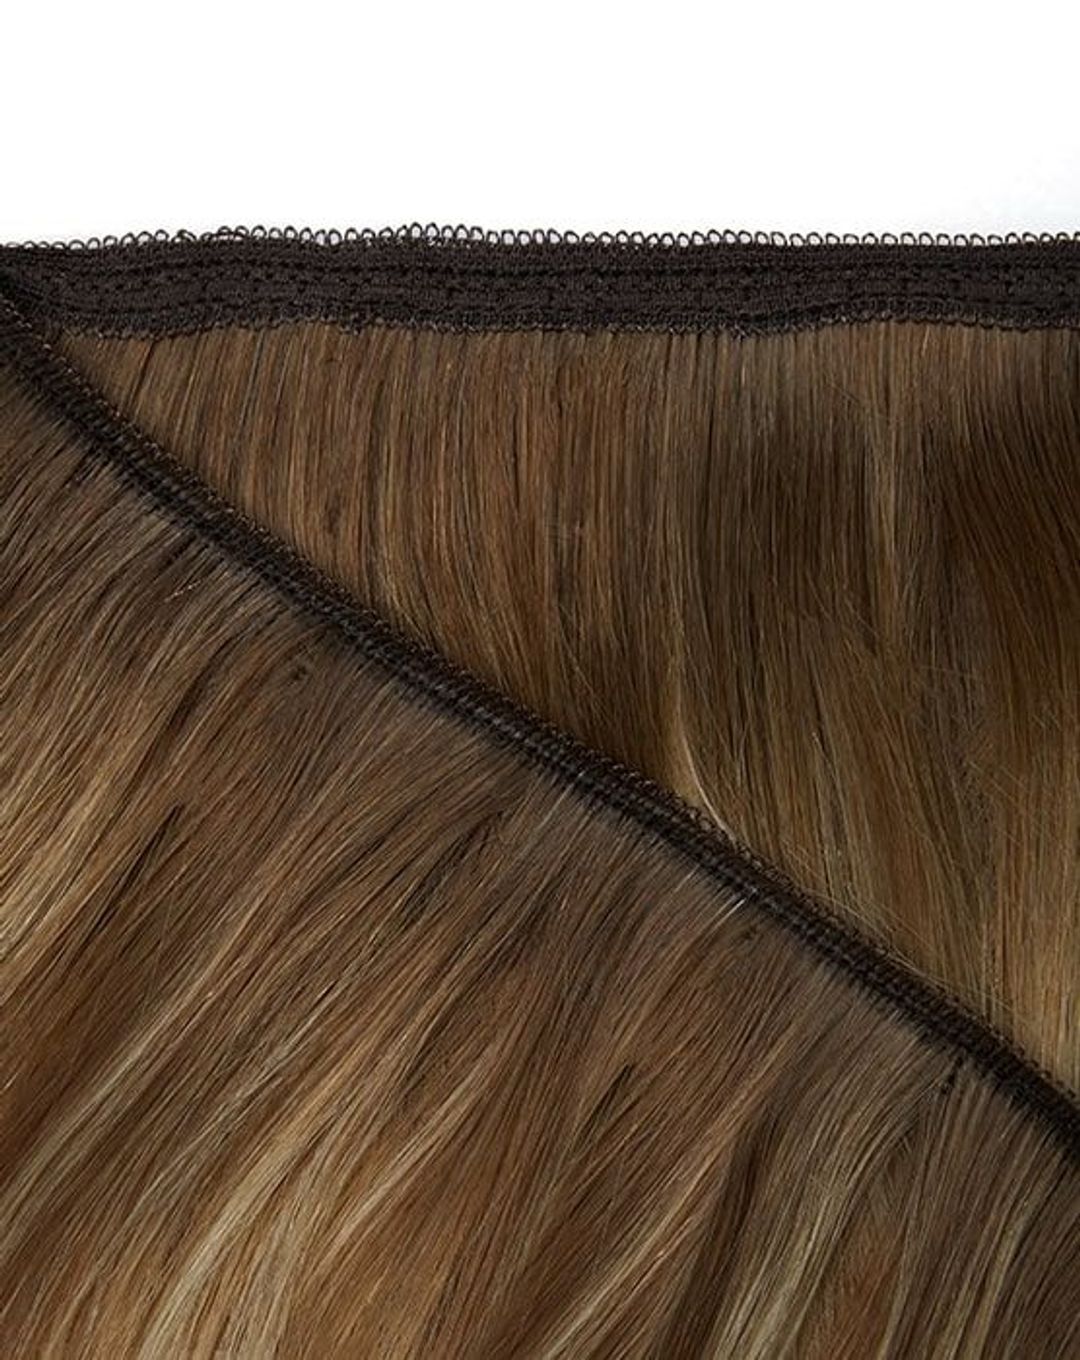 Beauty Works Gold Double Weft Extensions - Jet Black,24"